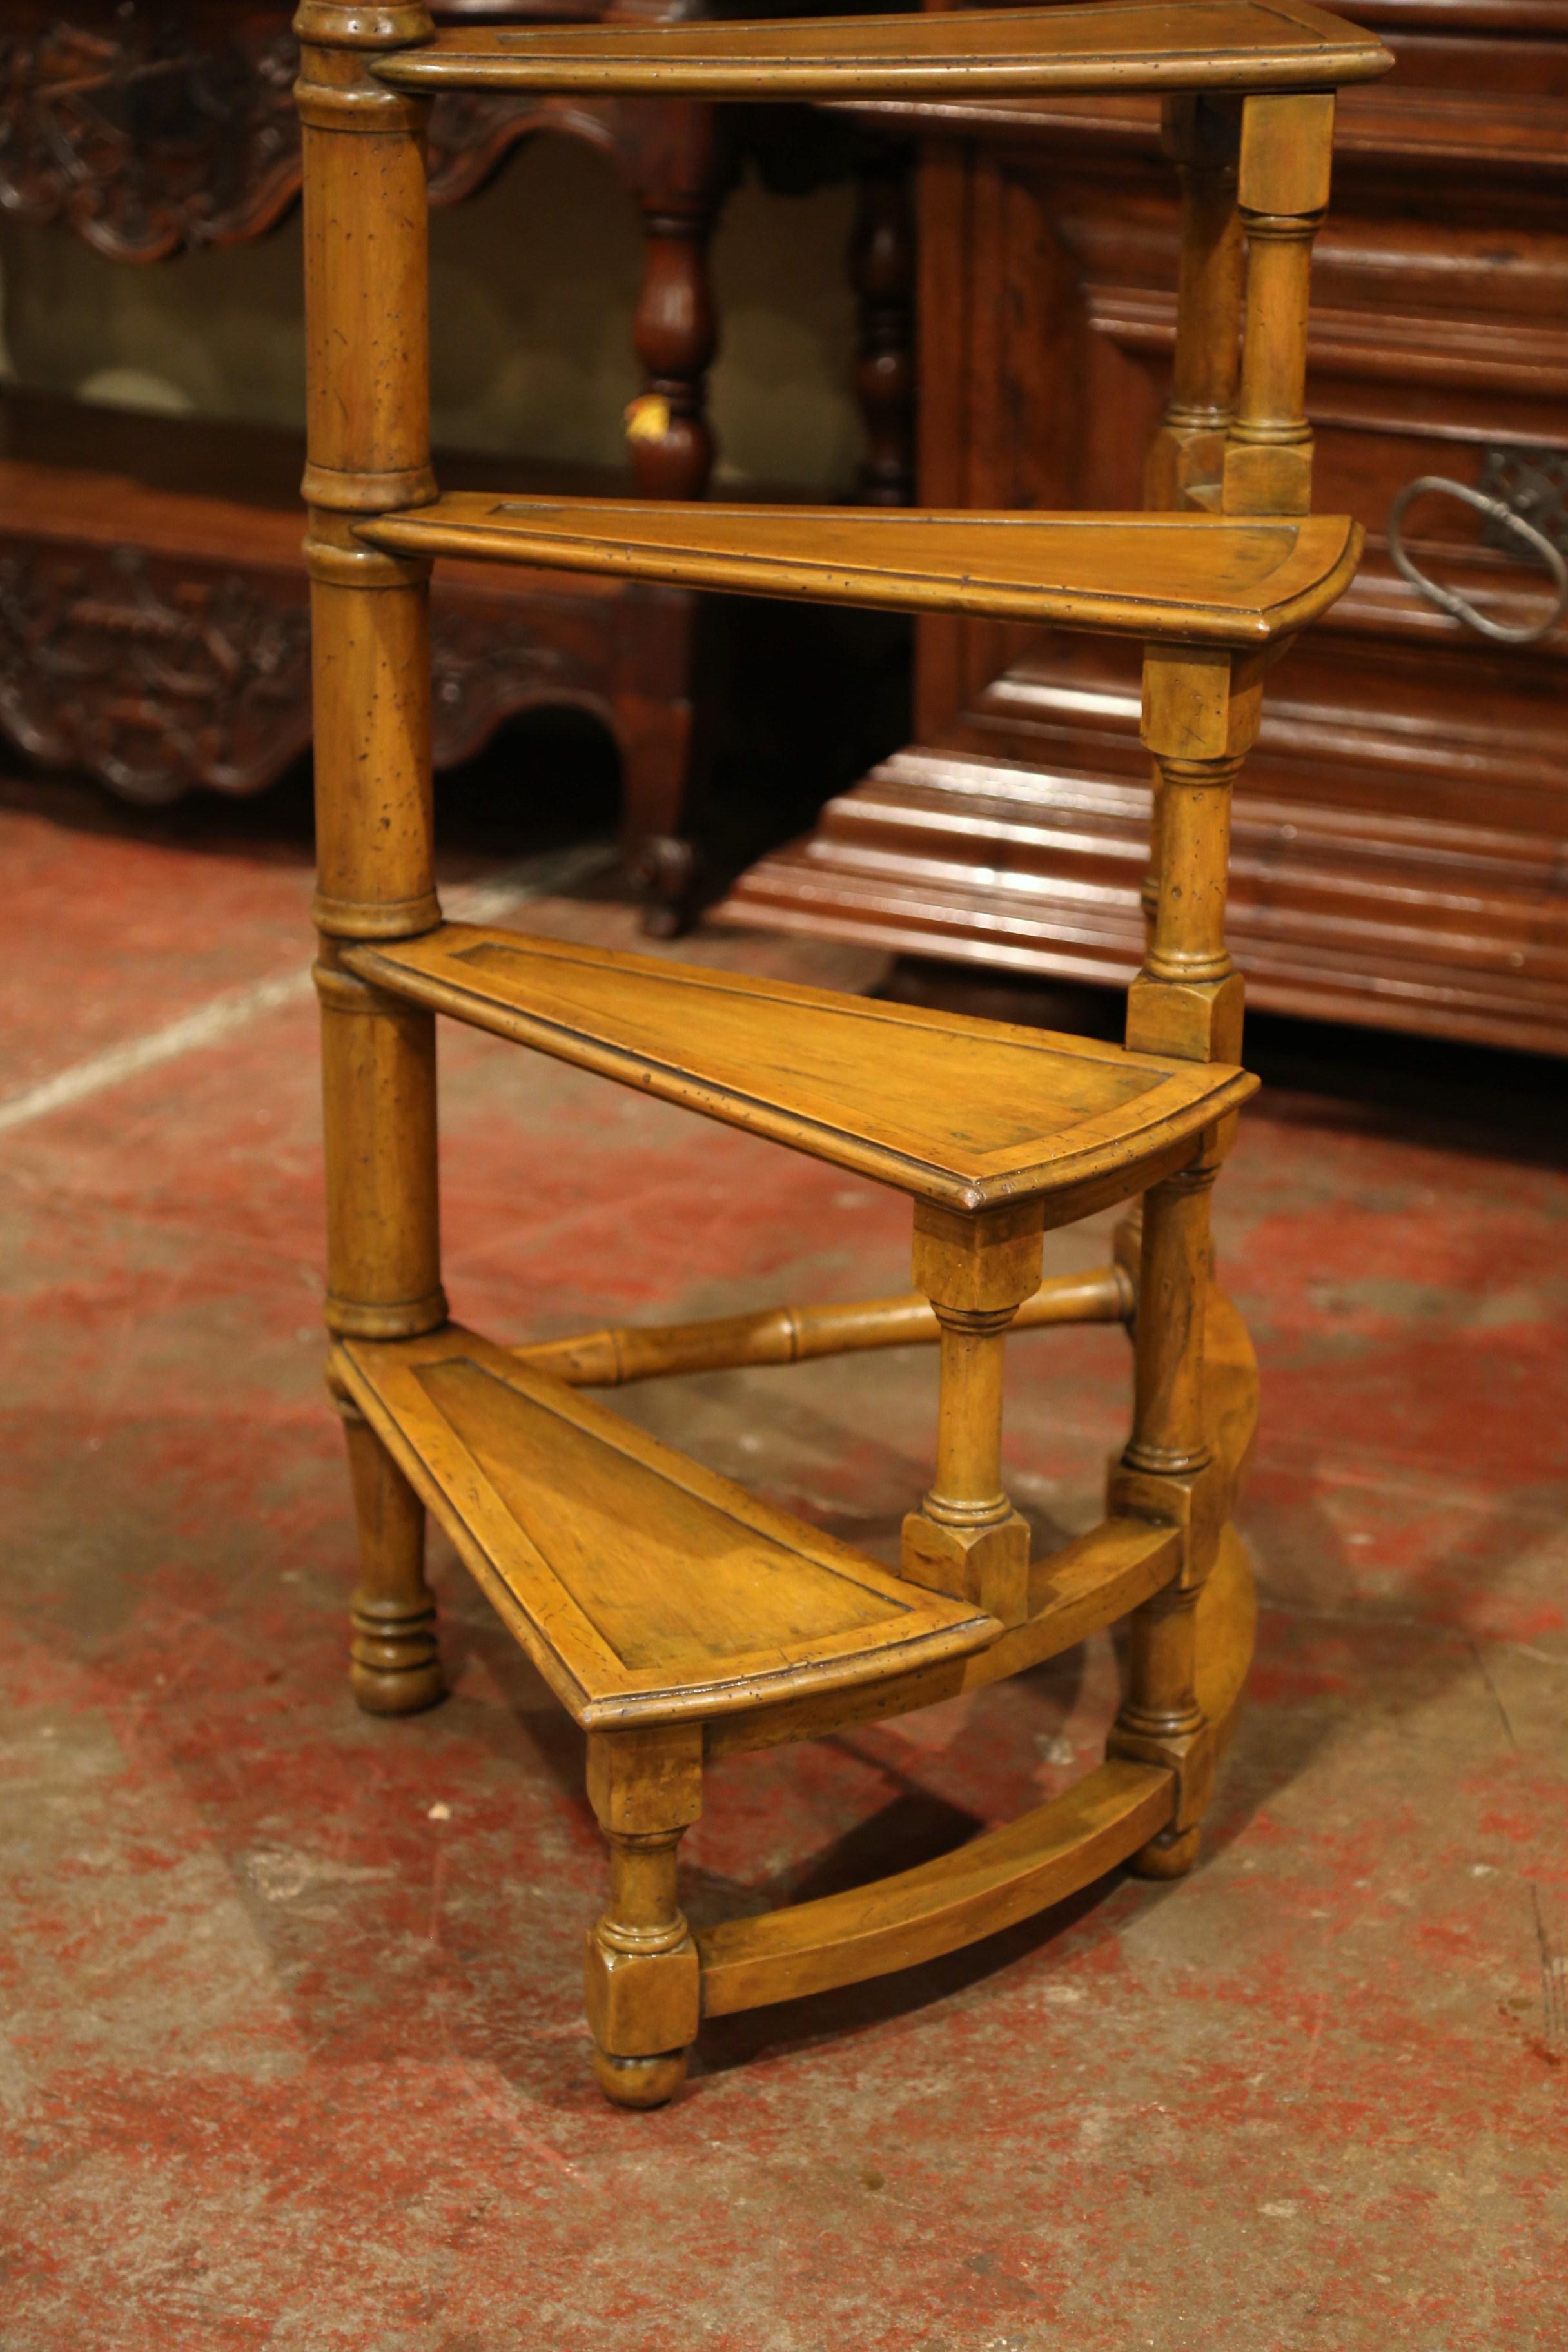 This tall Victorian fruit wood library stairs with turned legs and central post was created in England, circa 1950. The thin stairs come from a central, turned circular steps and spiral out for extra height with a slim profile. The steps are in